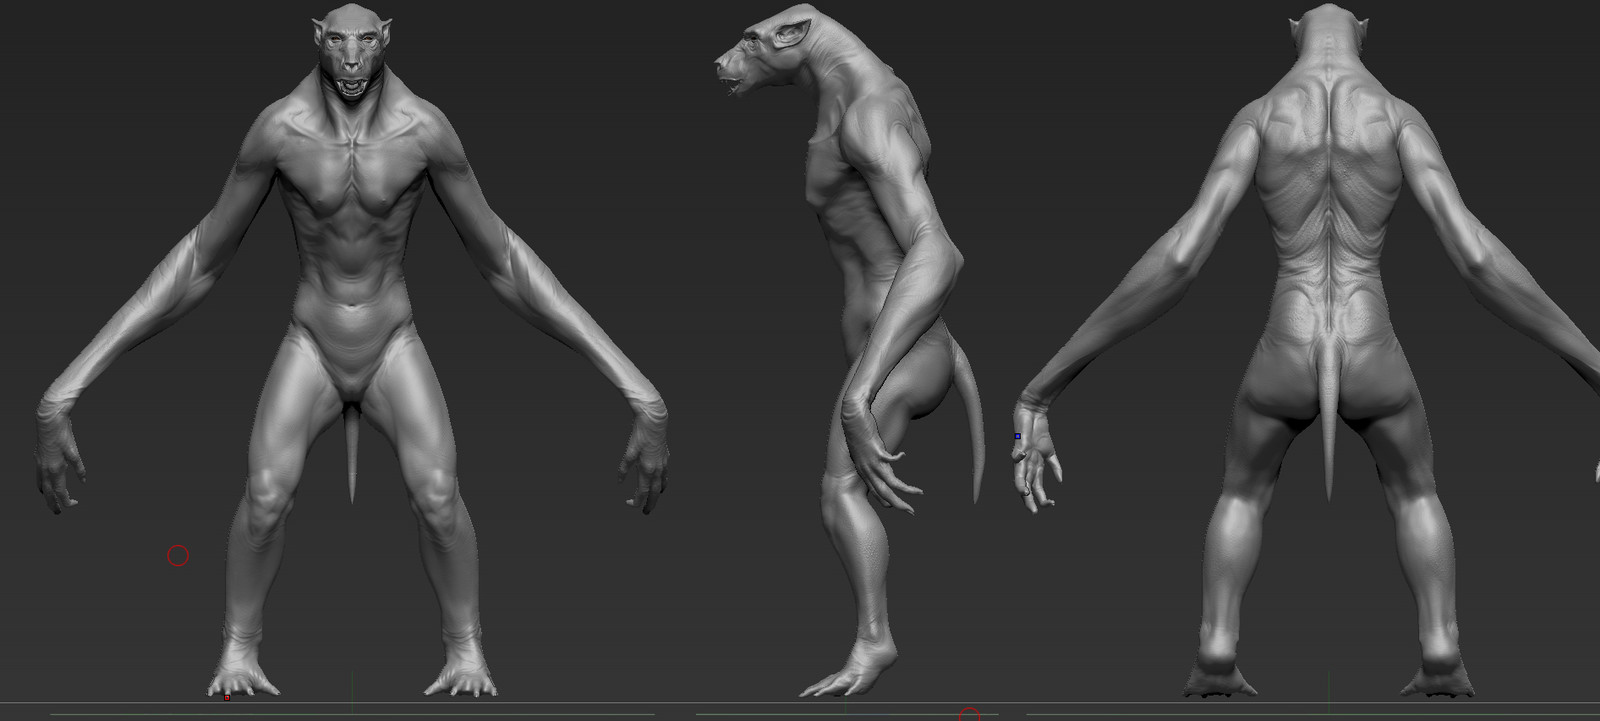 Ortho as it looks in zbrush